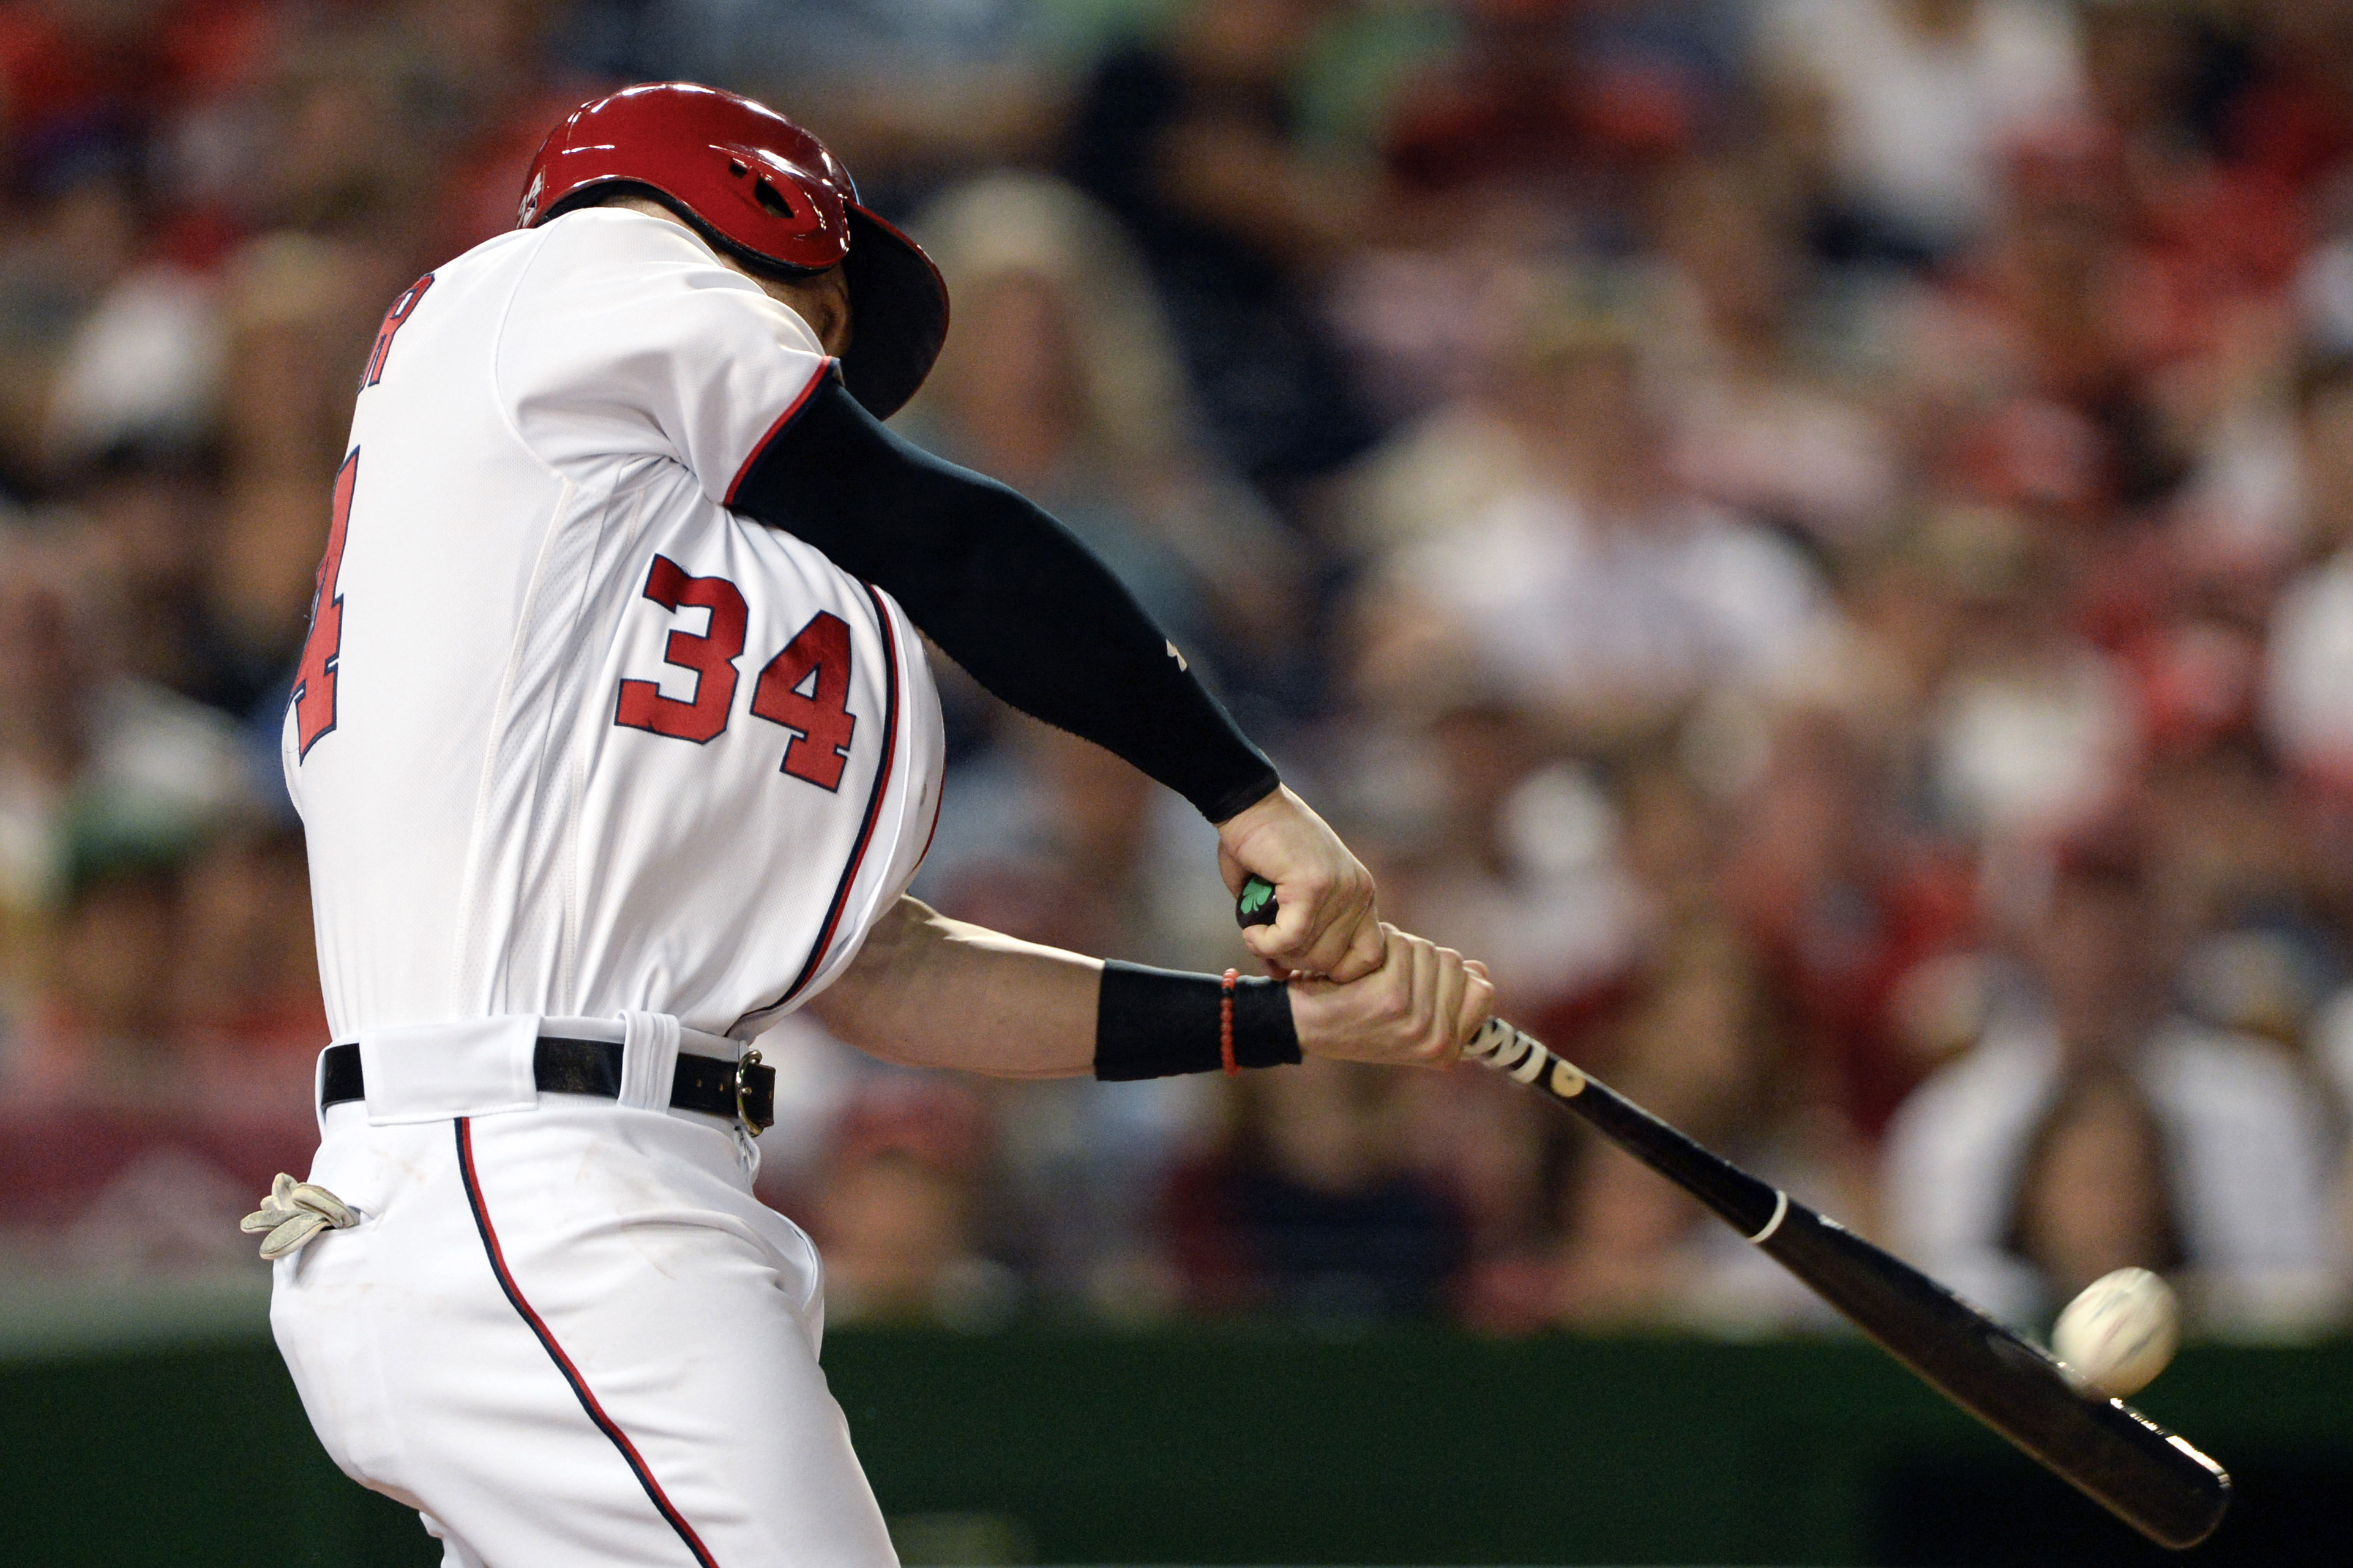 Harper, Espinosa HRs carry Nationals over Cardinals 2-1